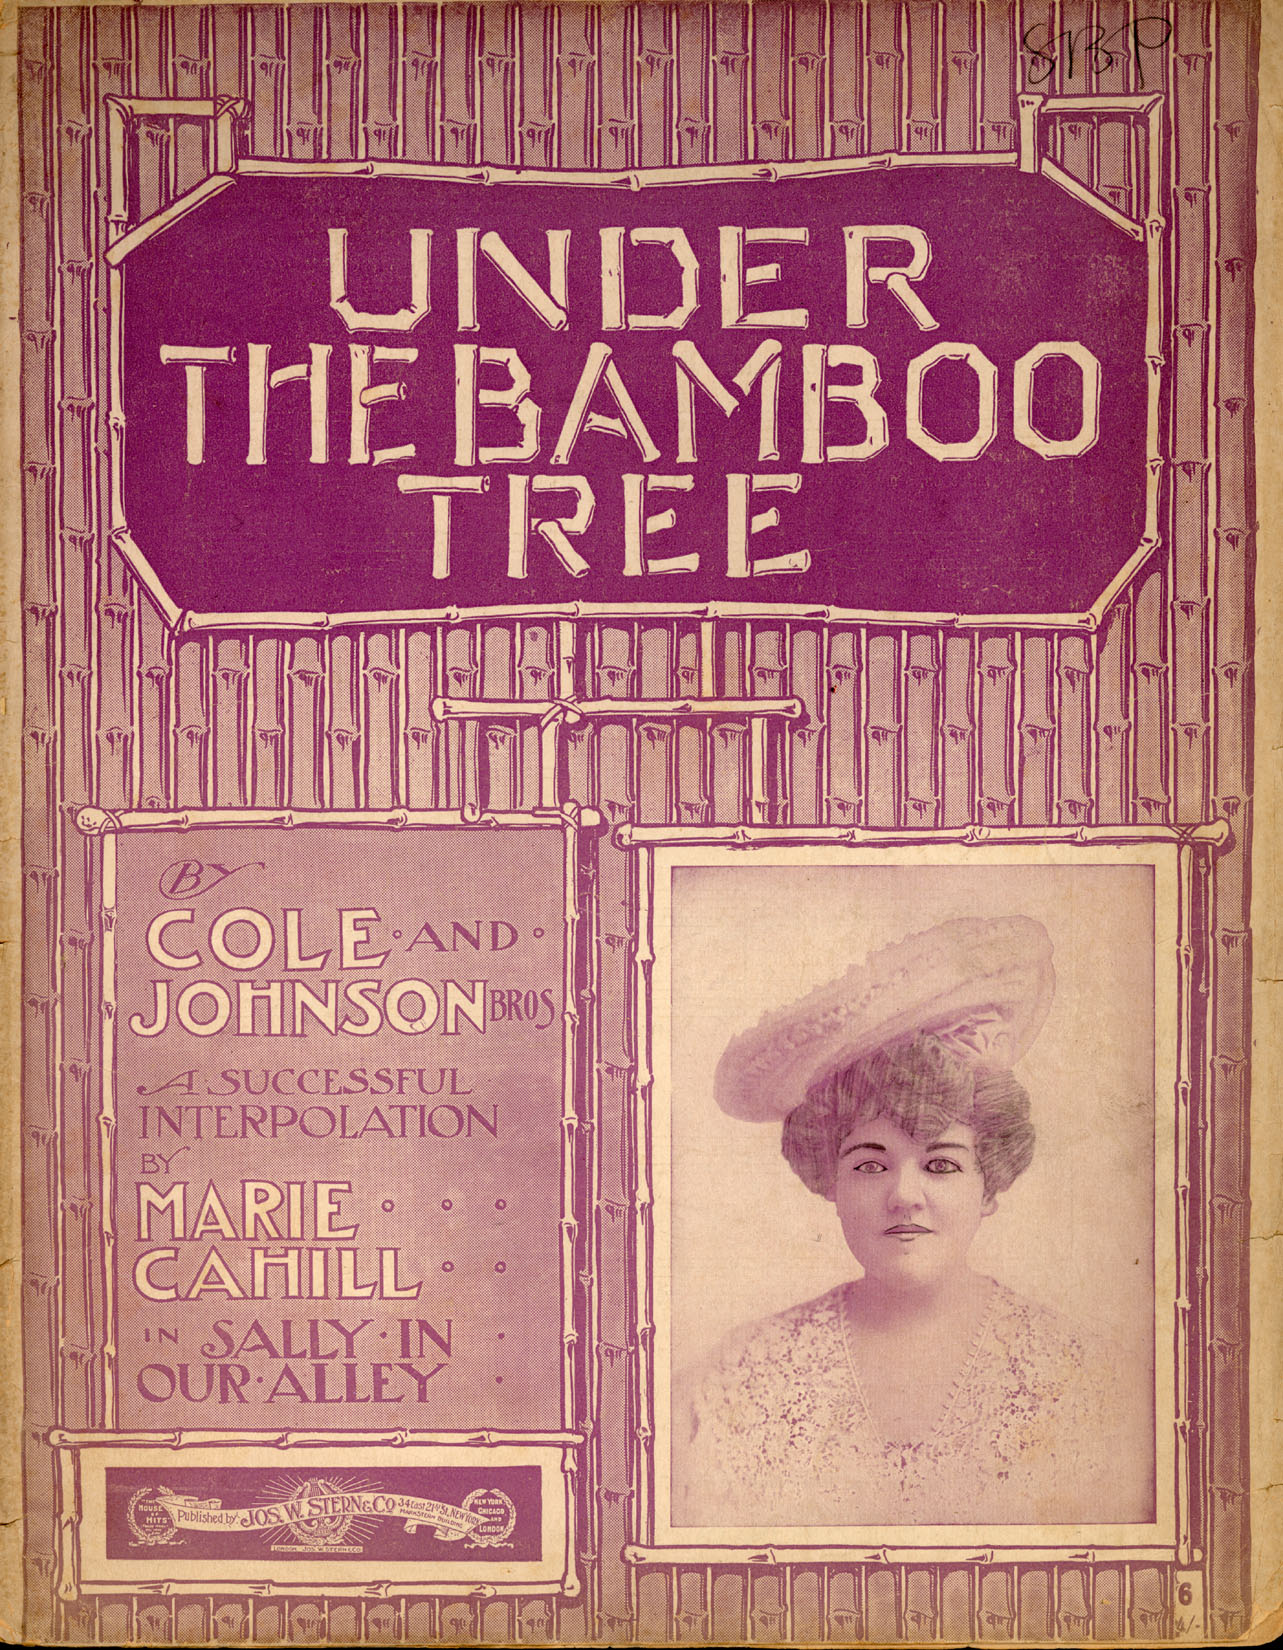 Under the Bamboo Tree lyrics, words and music by Robert Cole and The Johnson Bros., 1902 performed by Margaret OâBrien (âTootieâ) and Judy Garland (âEstherâ) in Meet Me in St. Louis